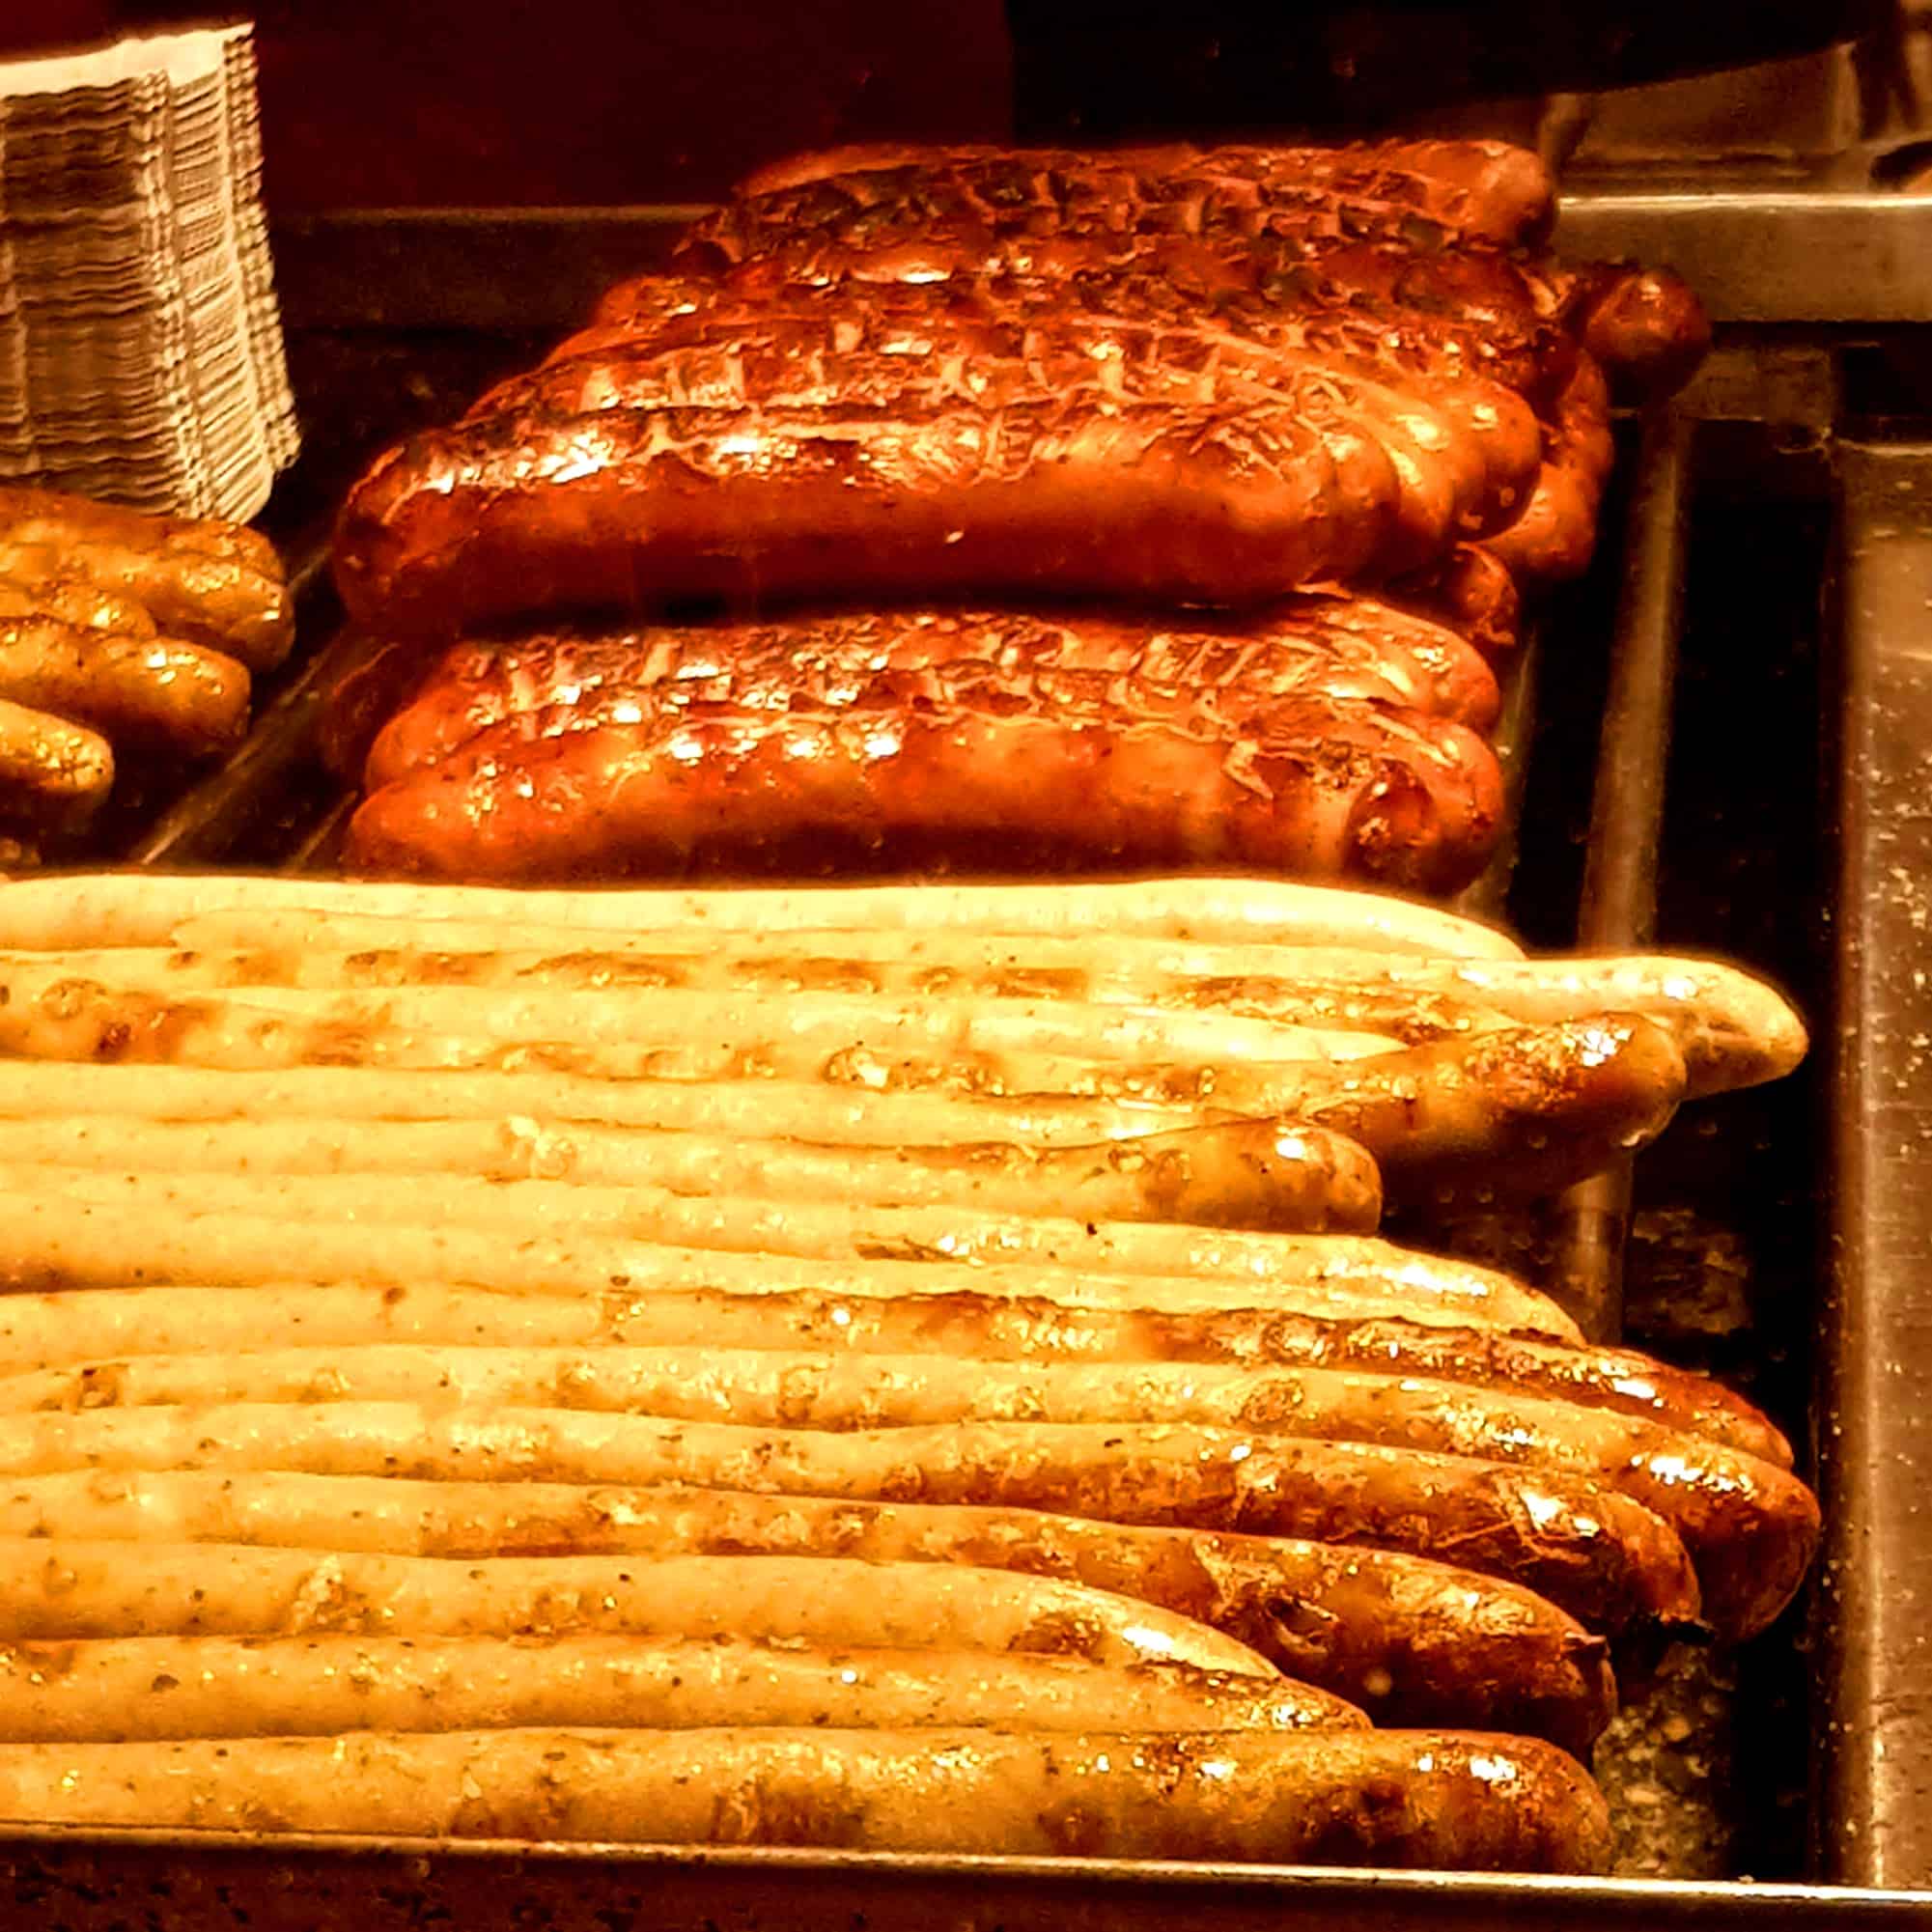 German Sausages being grilled at a German Christmas Market